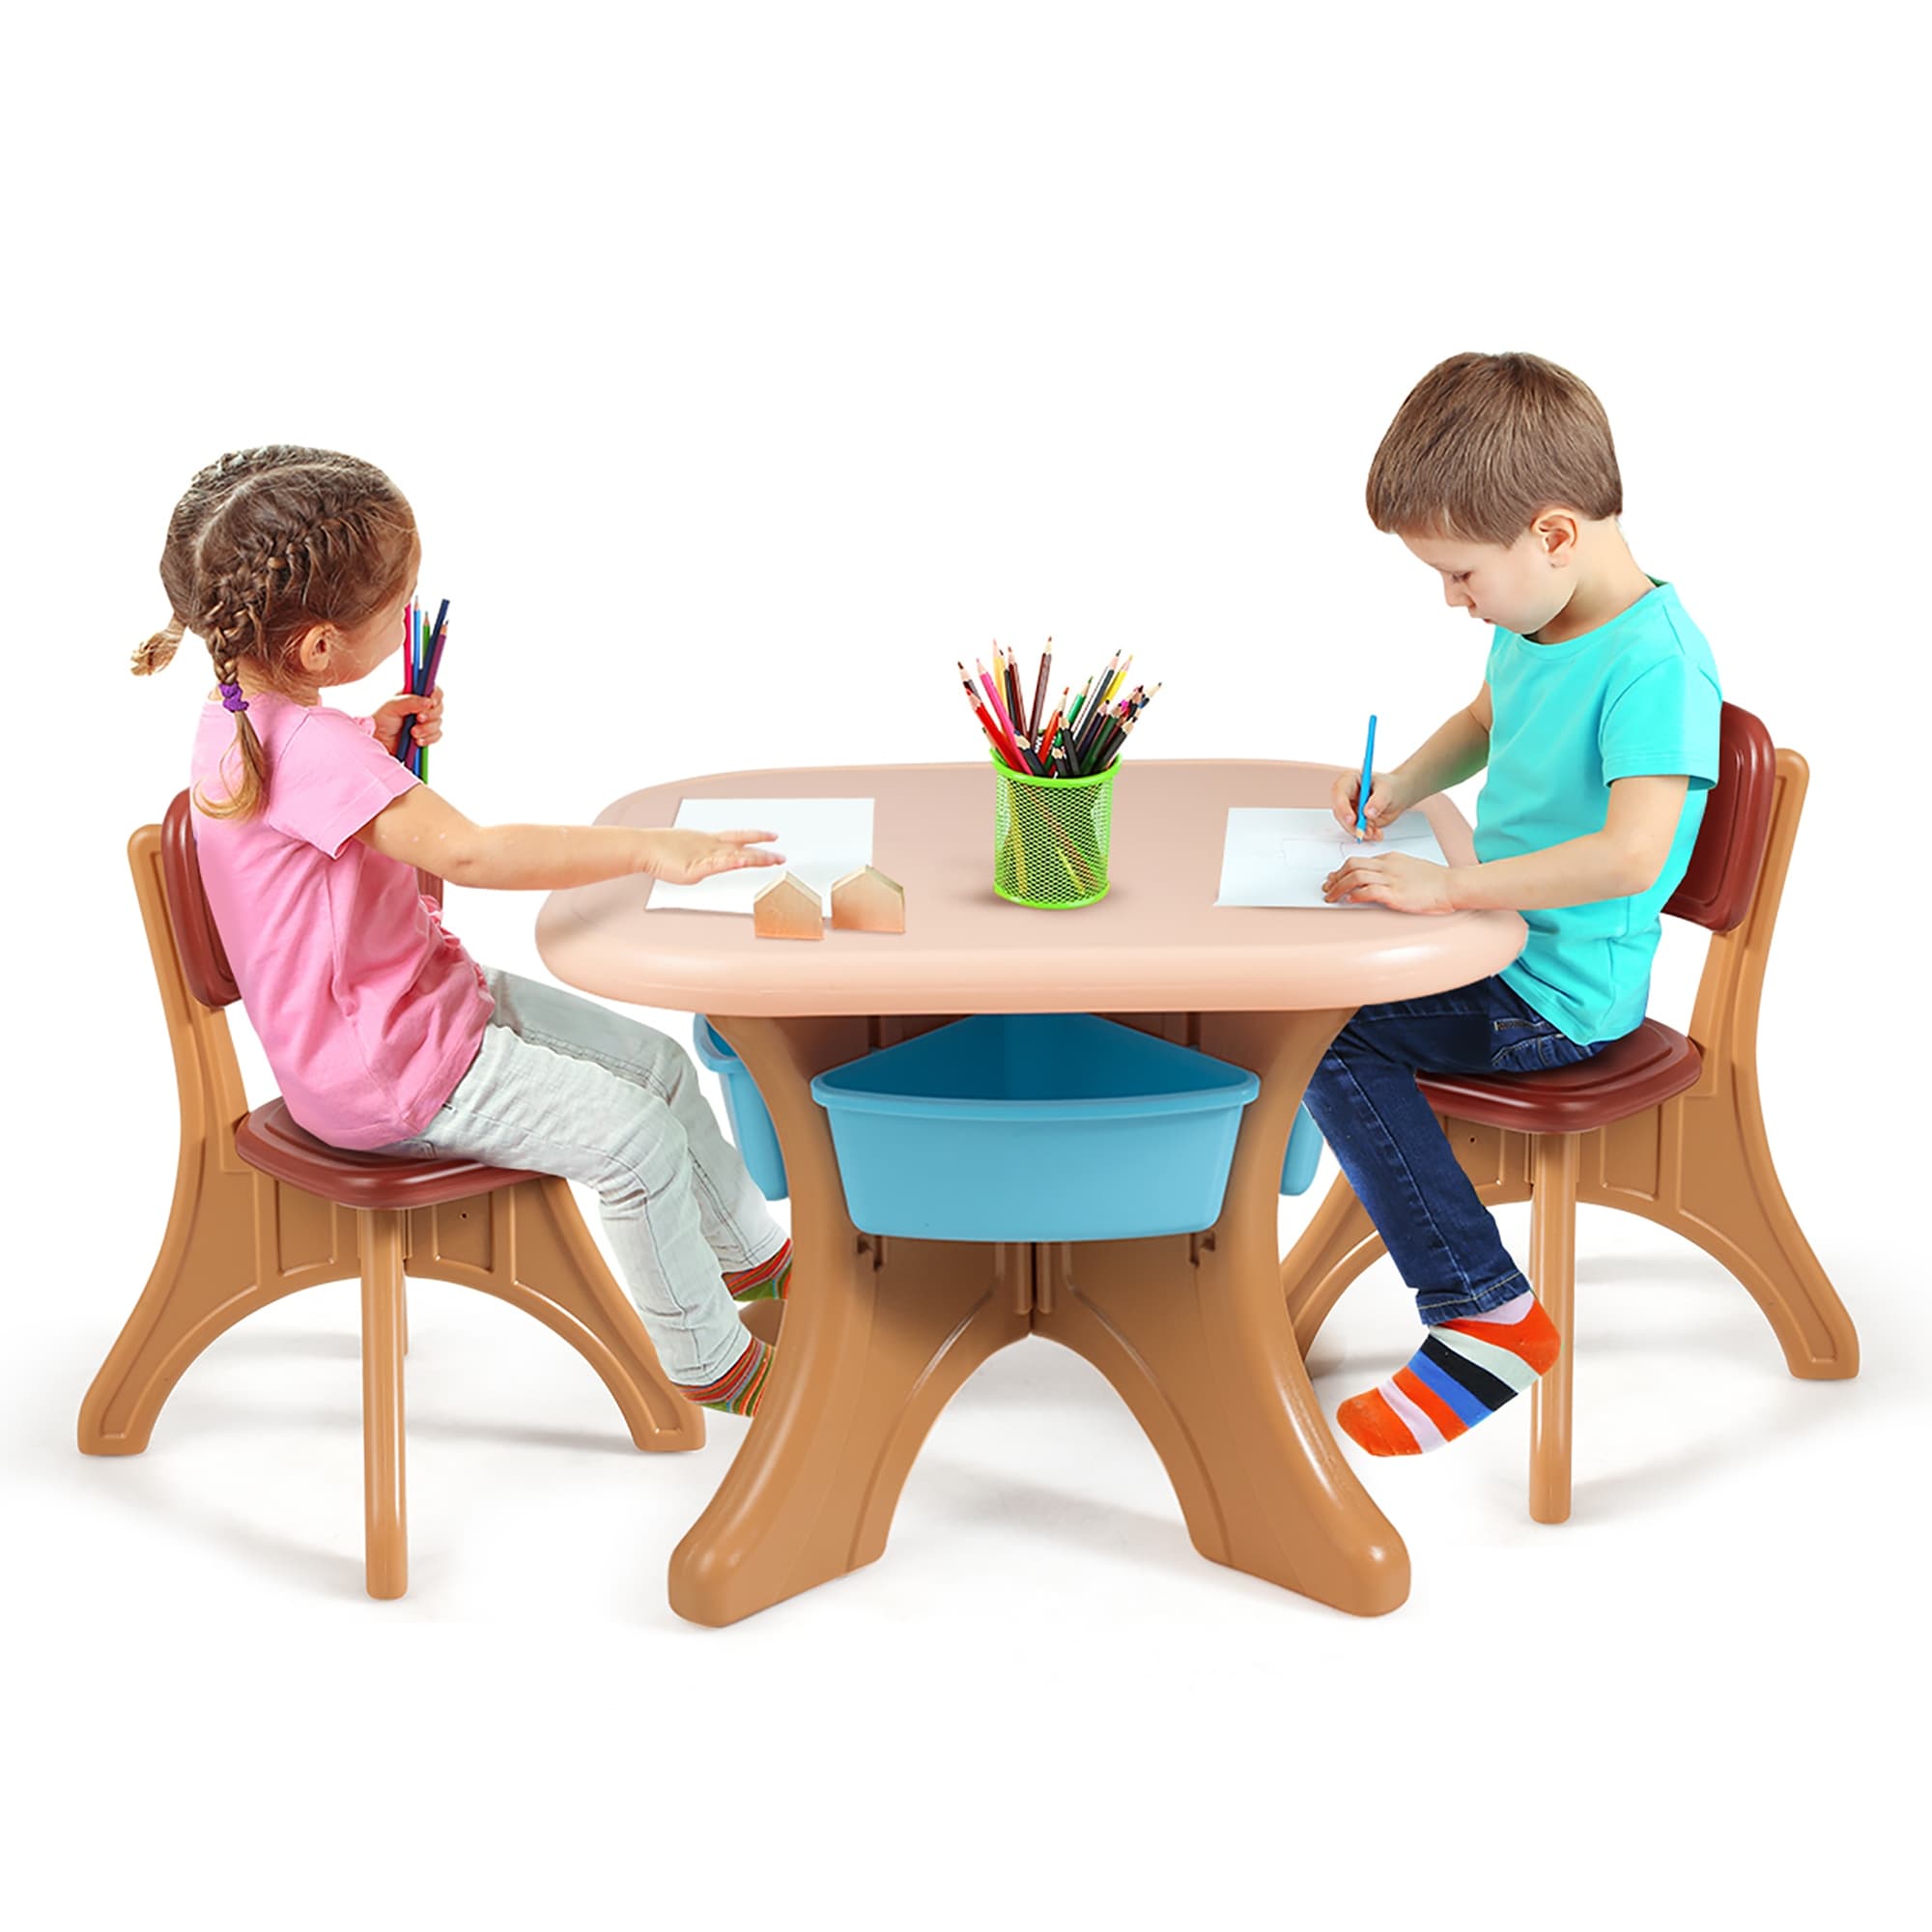 Children’s Table and Chair Set for Kids Building Play Reading Writing Toy Storage Early Educational Toddler Toys Kacsoo Multi Activity Table Set 